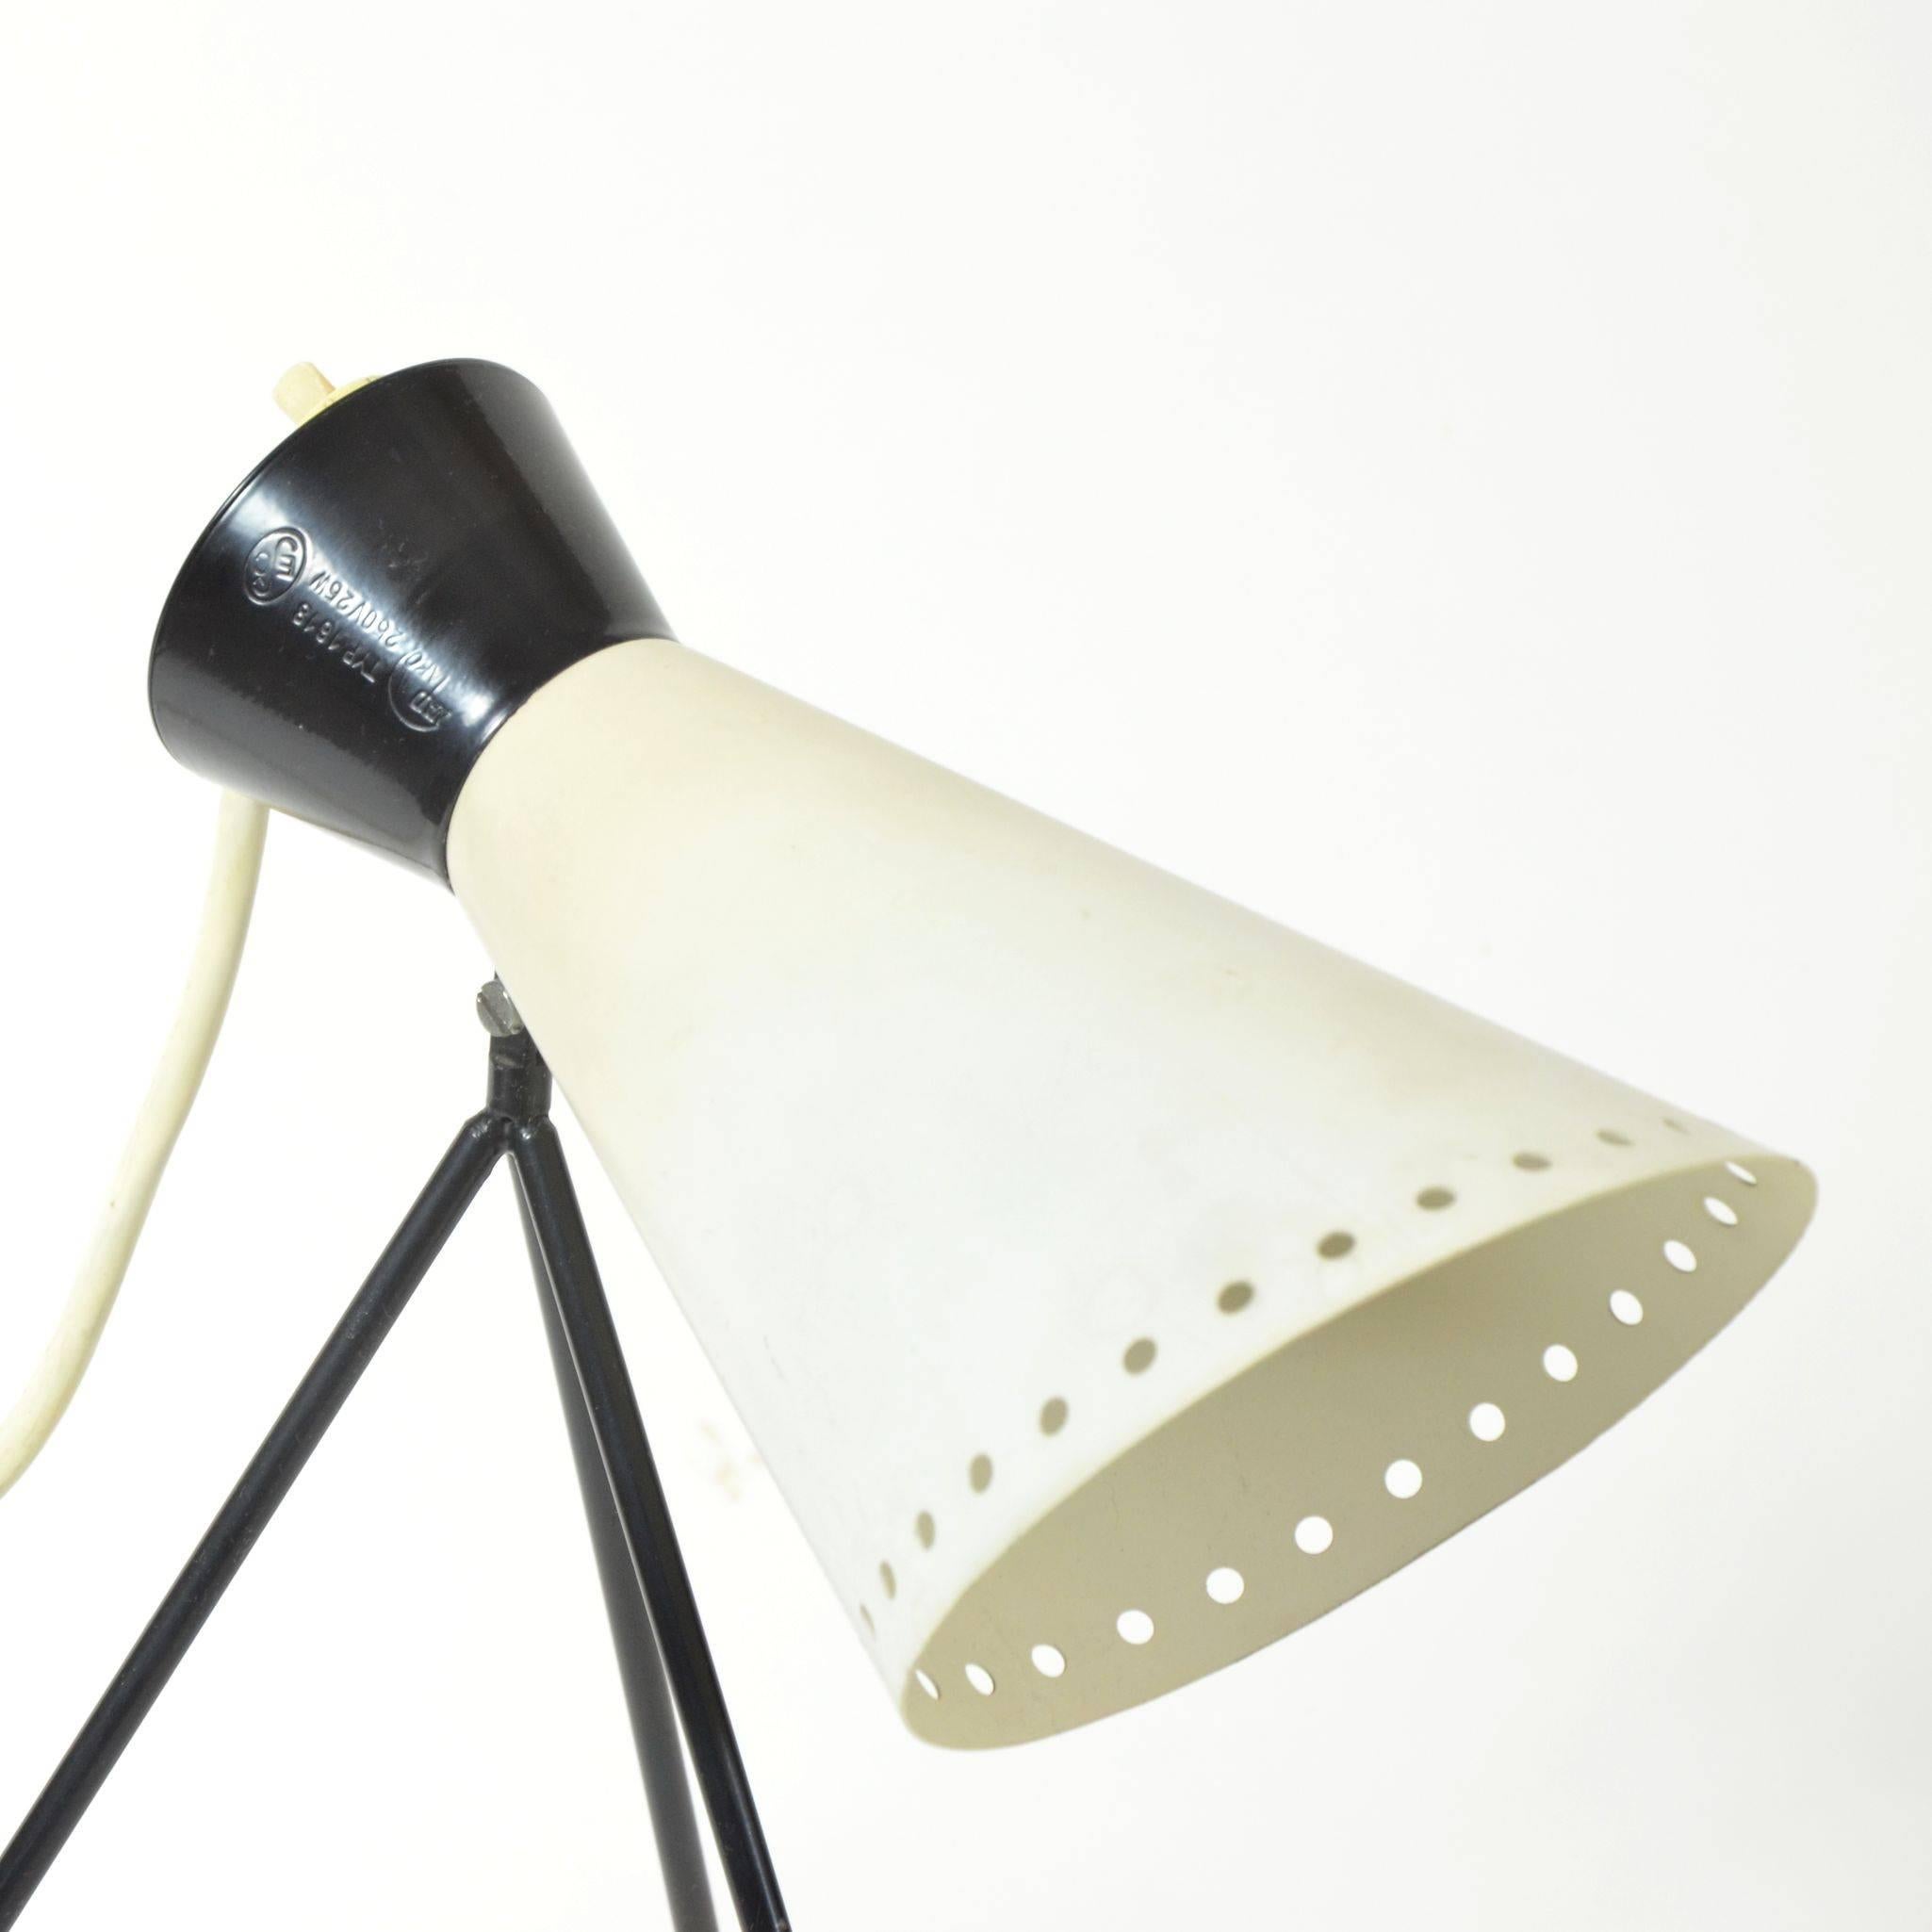 Unique vintage table lamp by lesser known Czech industrial designer, Josef Hurka for Napako. The enameled red tripod base effortlessly supports the bright, conical metal shade. Lamp is in very good, original condition with no essential harms. Some